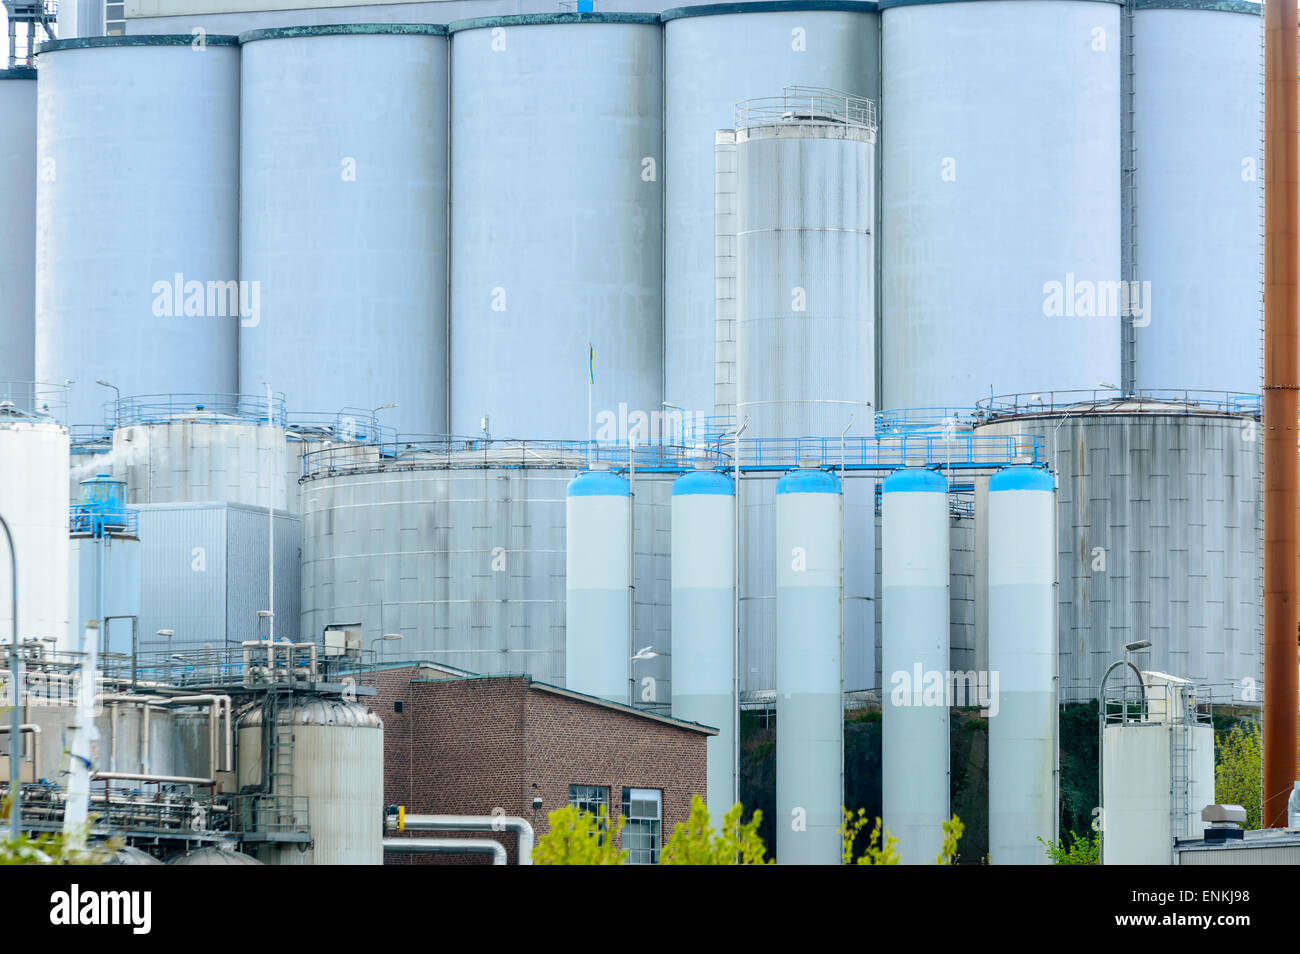 Gigantic silos on an industrial site. All are grey and some have blue tops. Almost form a solid background of metal. Stock Photo